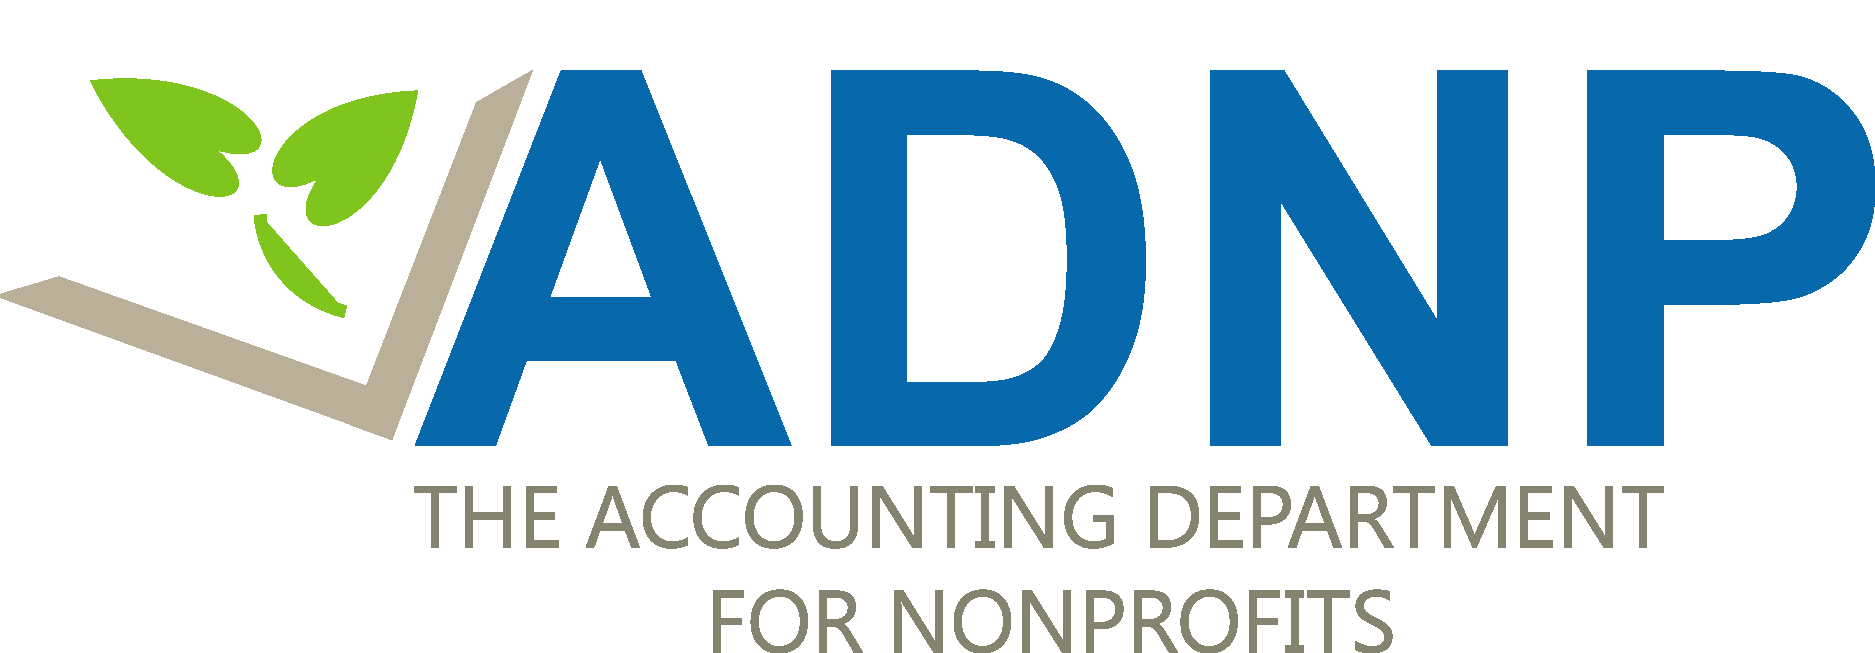 The Accounting Department for Nonprofits Logo Vector - (.Ai .PNG .SVG ...